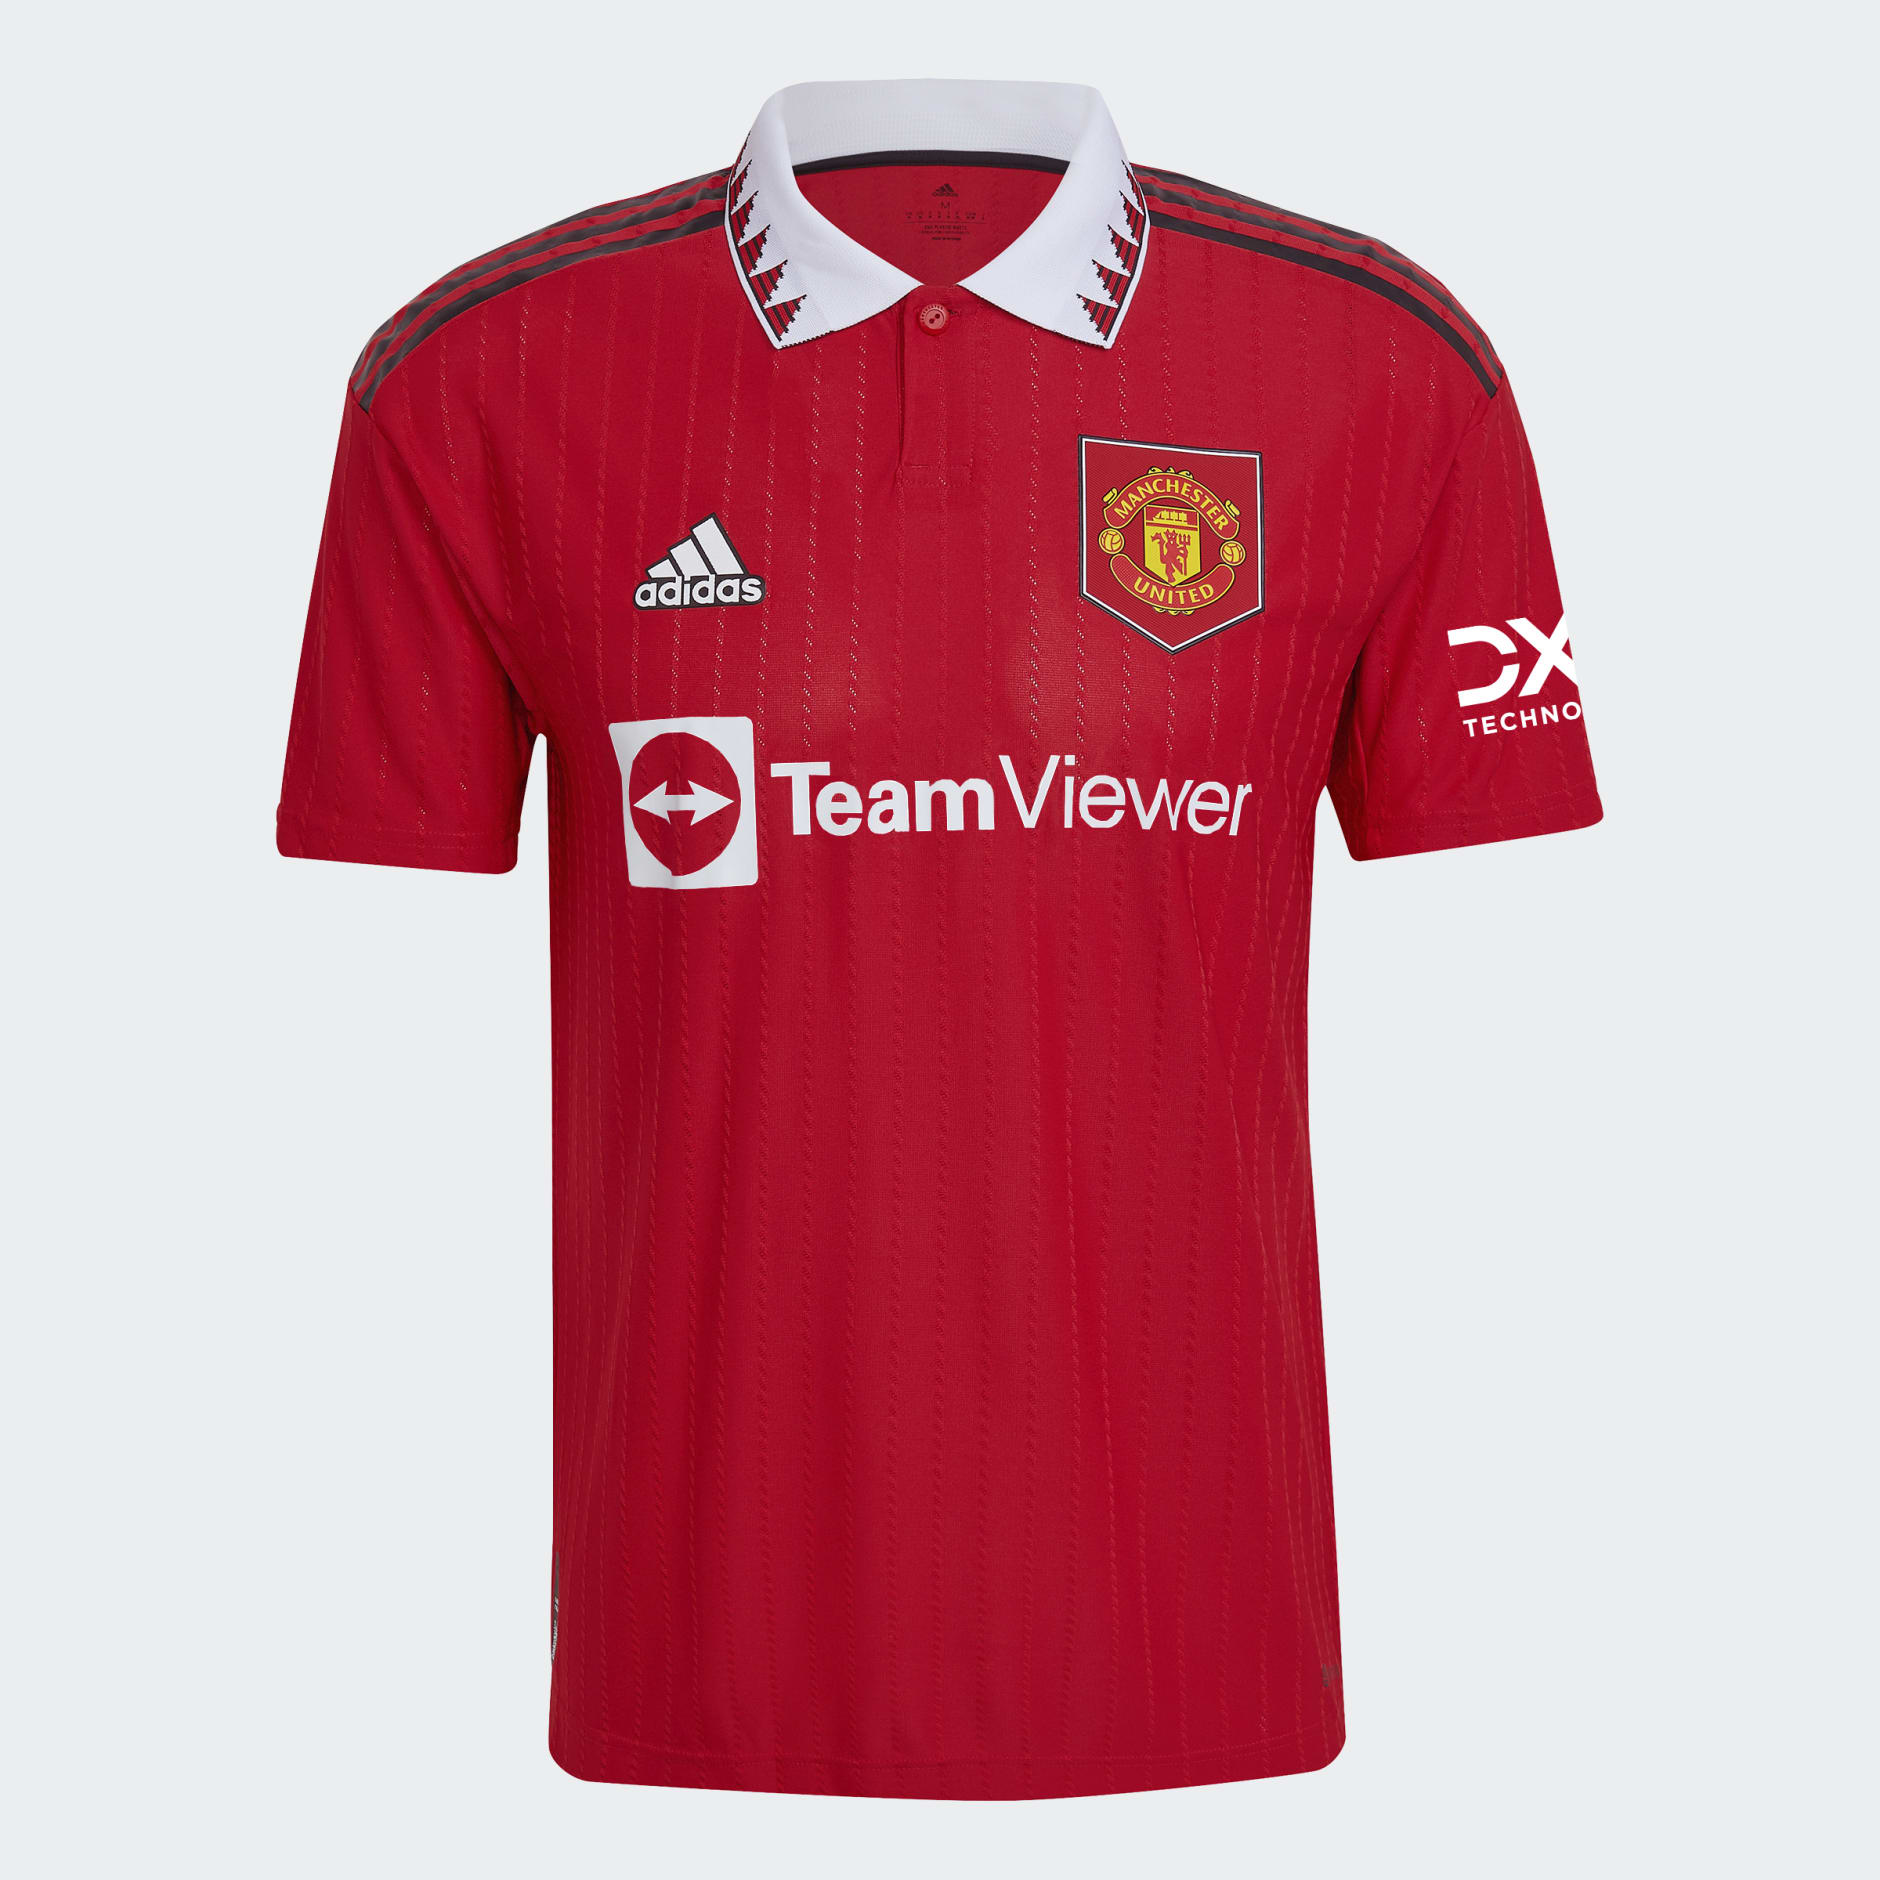 manchester united adidas jersey